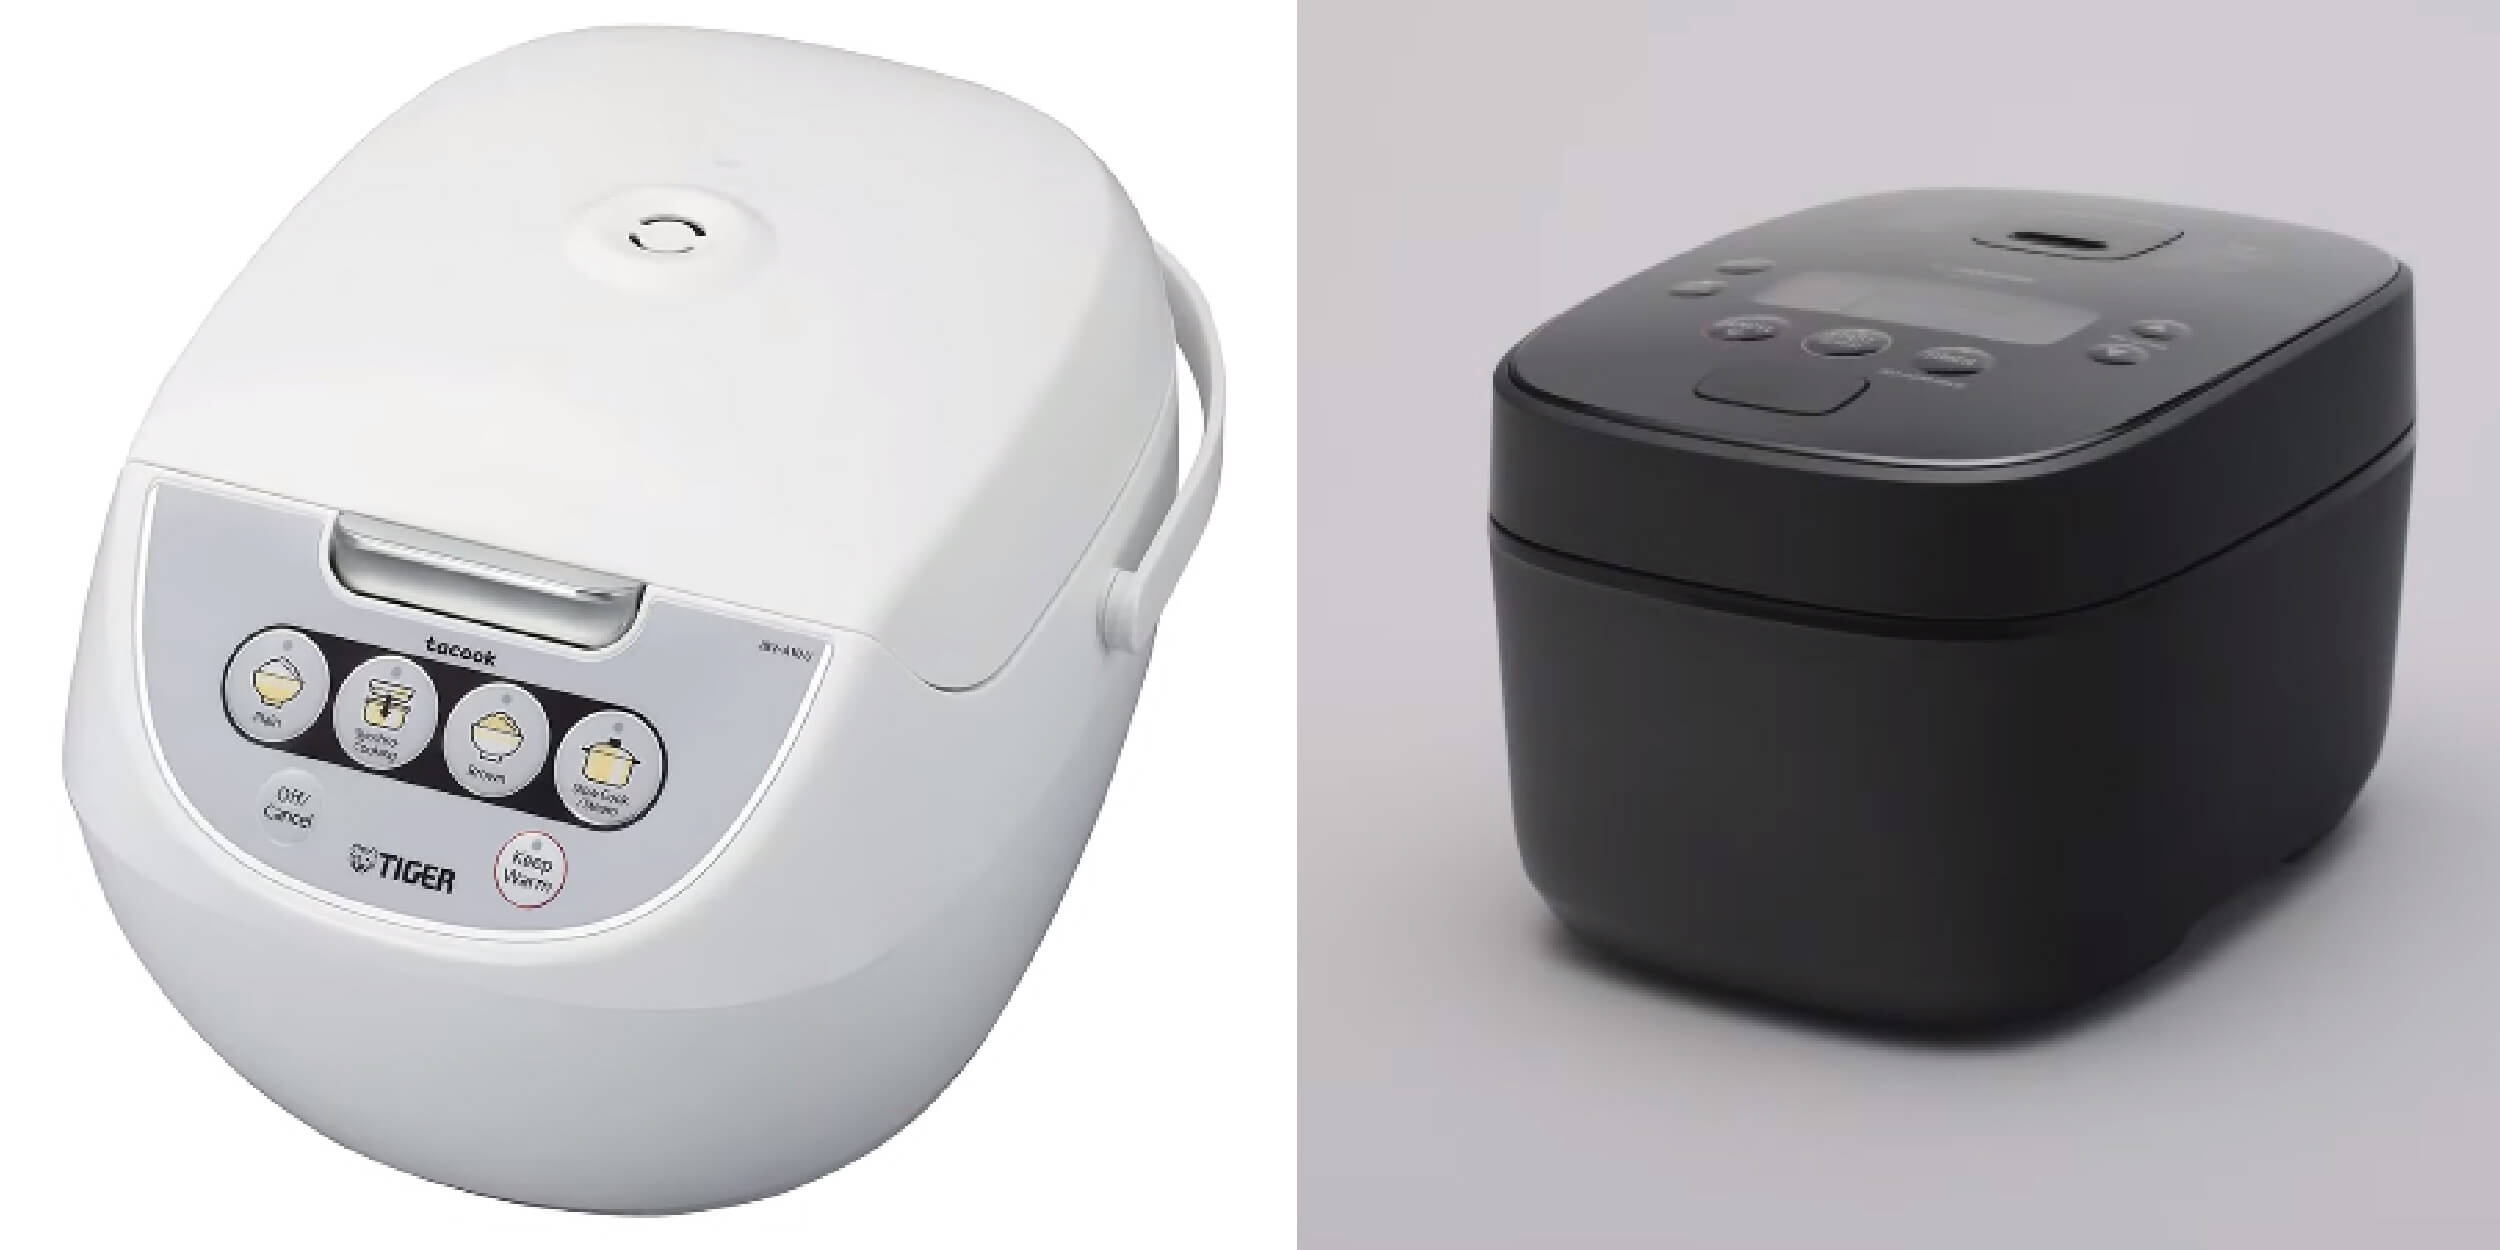 Tiger vs Zojirushi Rice Cooker: Which Is The Best Deal?